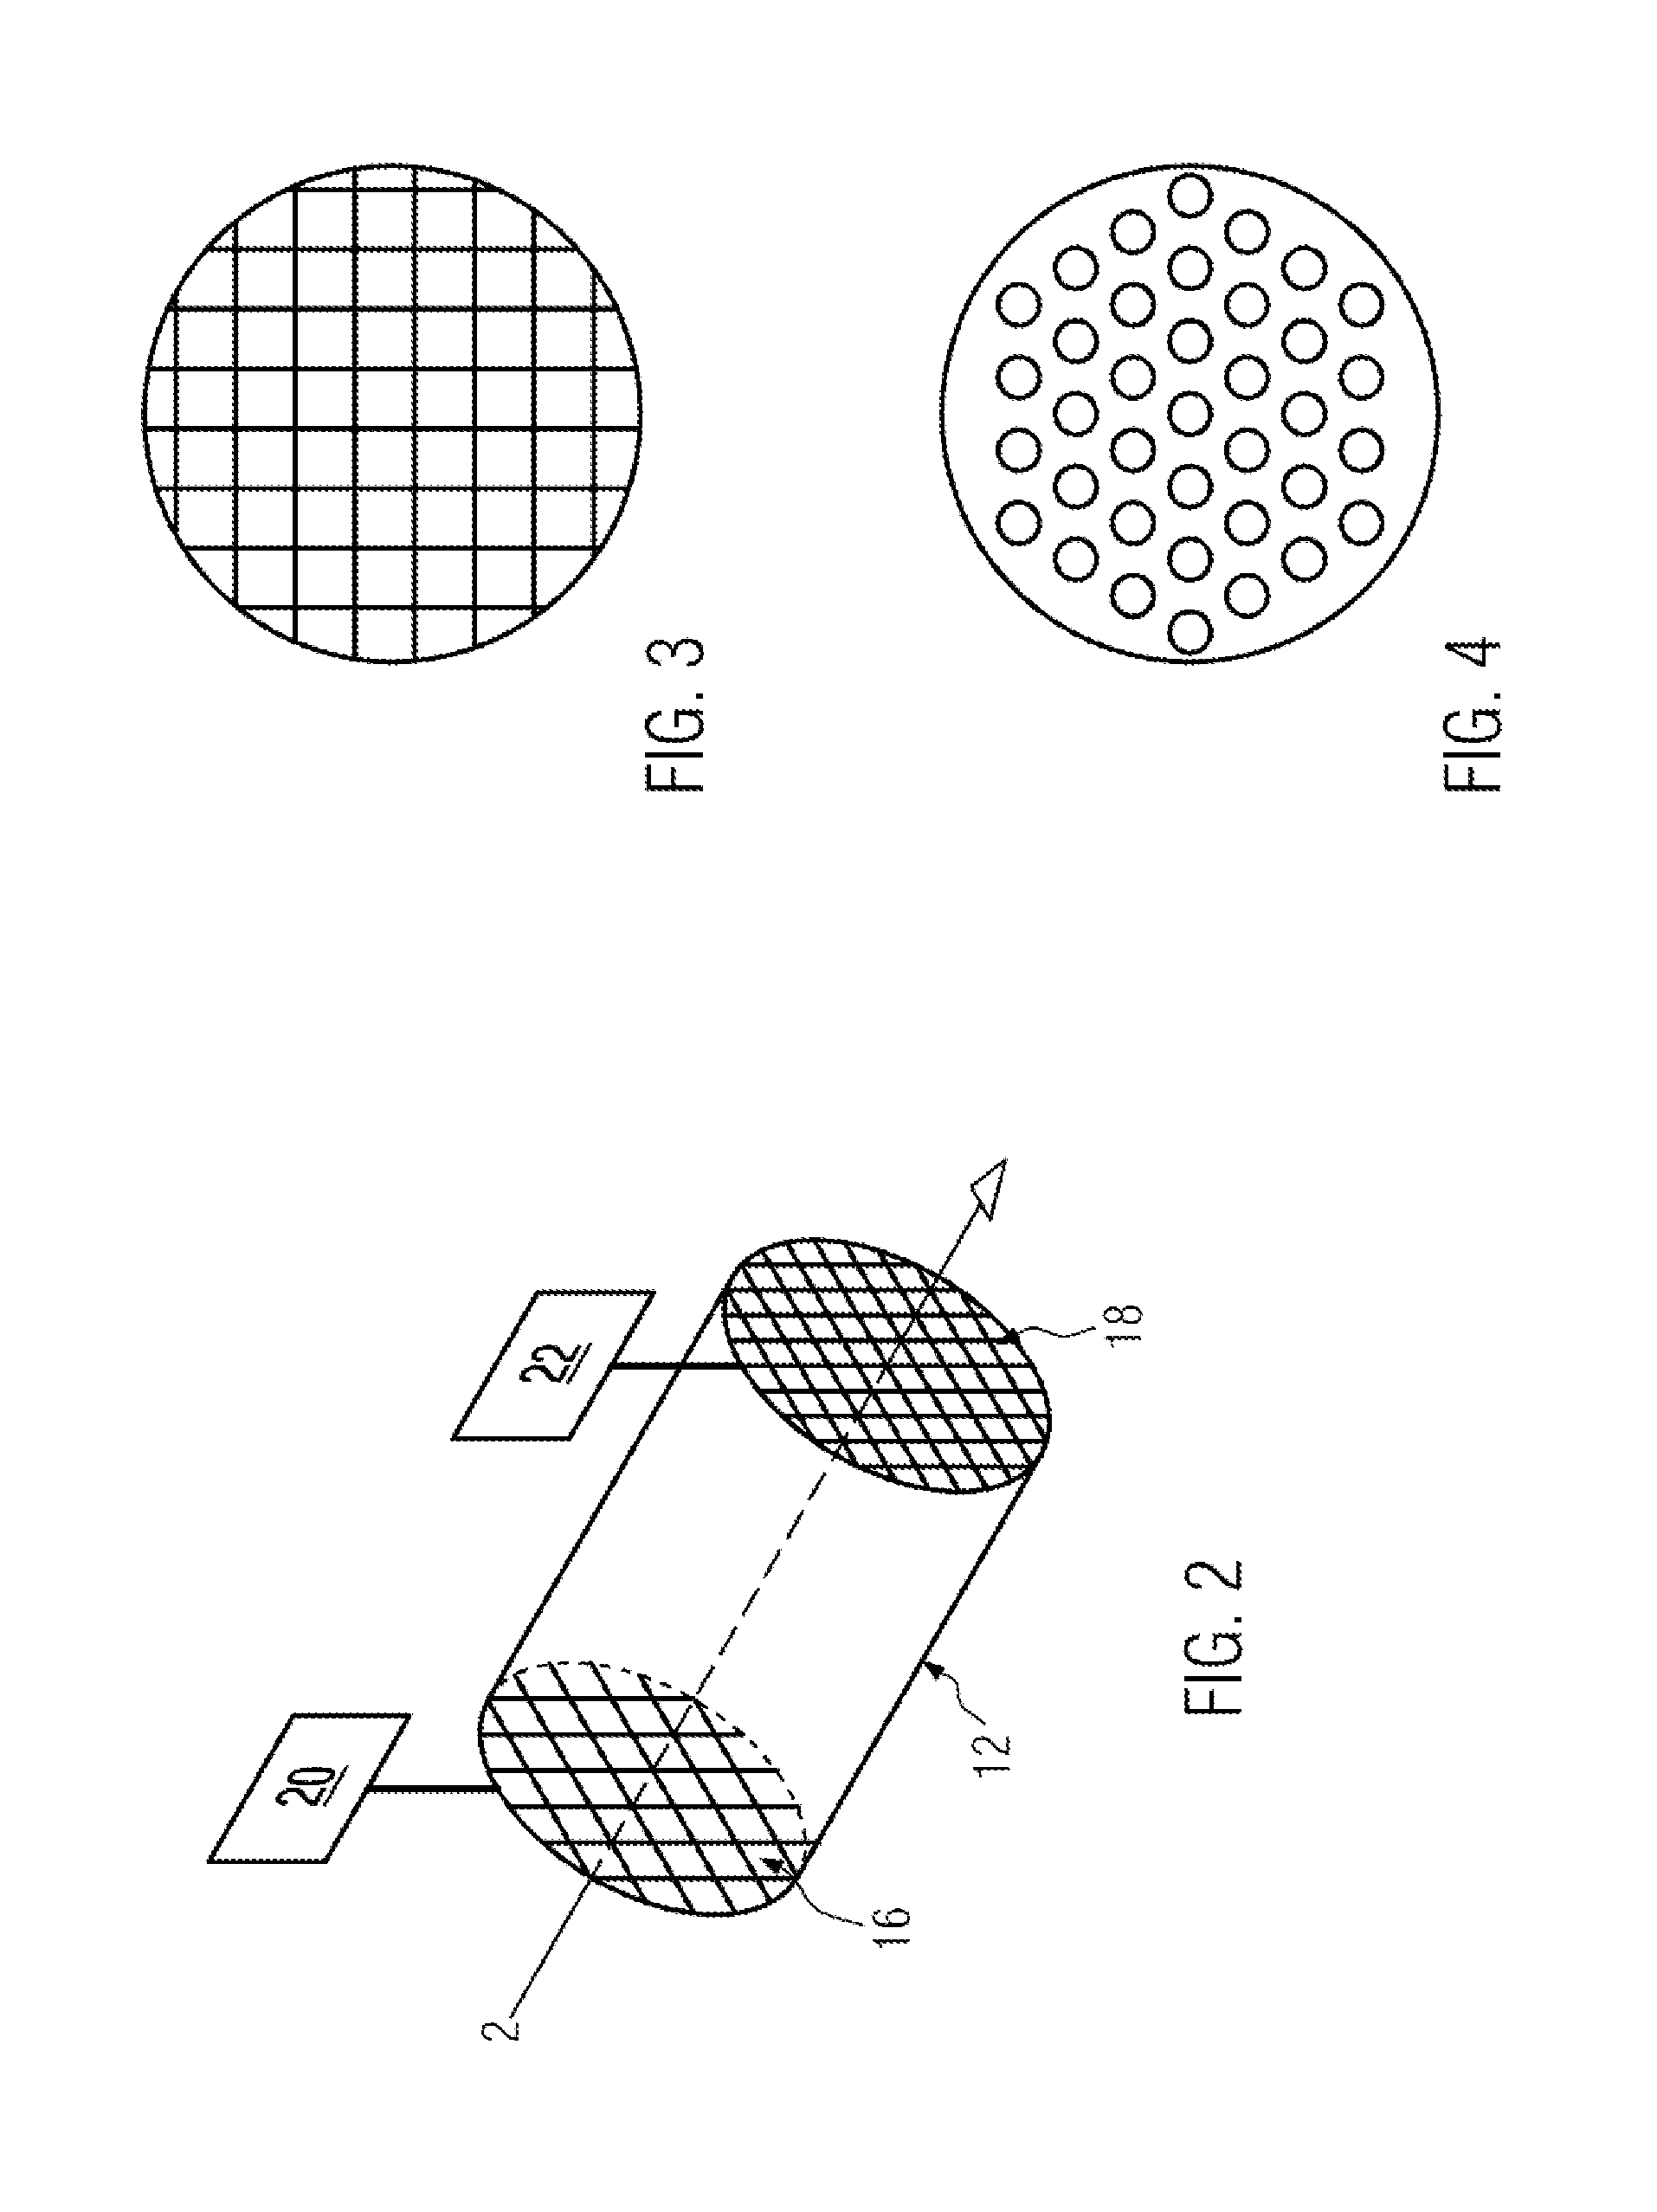 Apparatus and method for purifying thermoplastic polymers